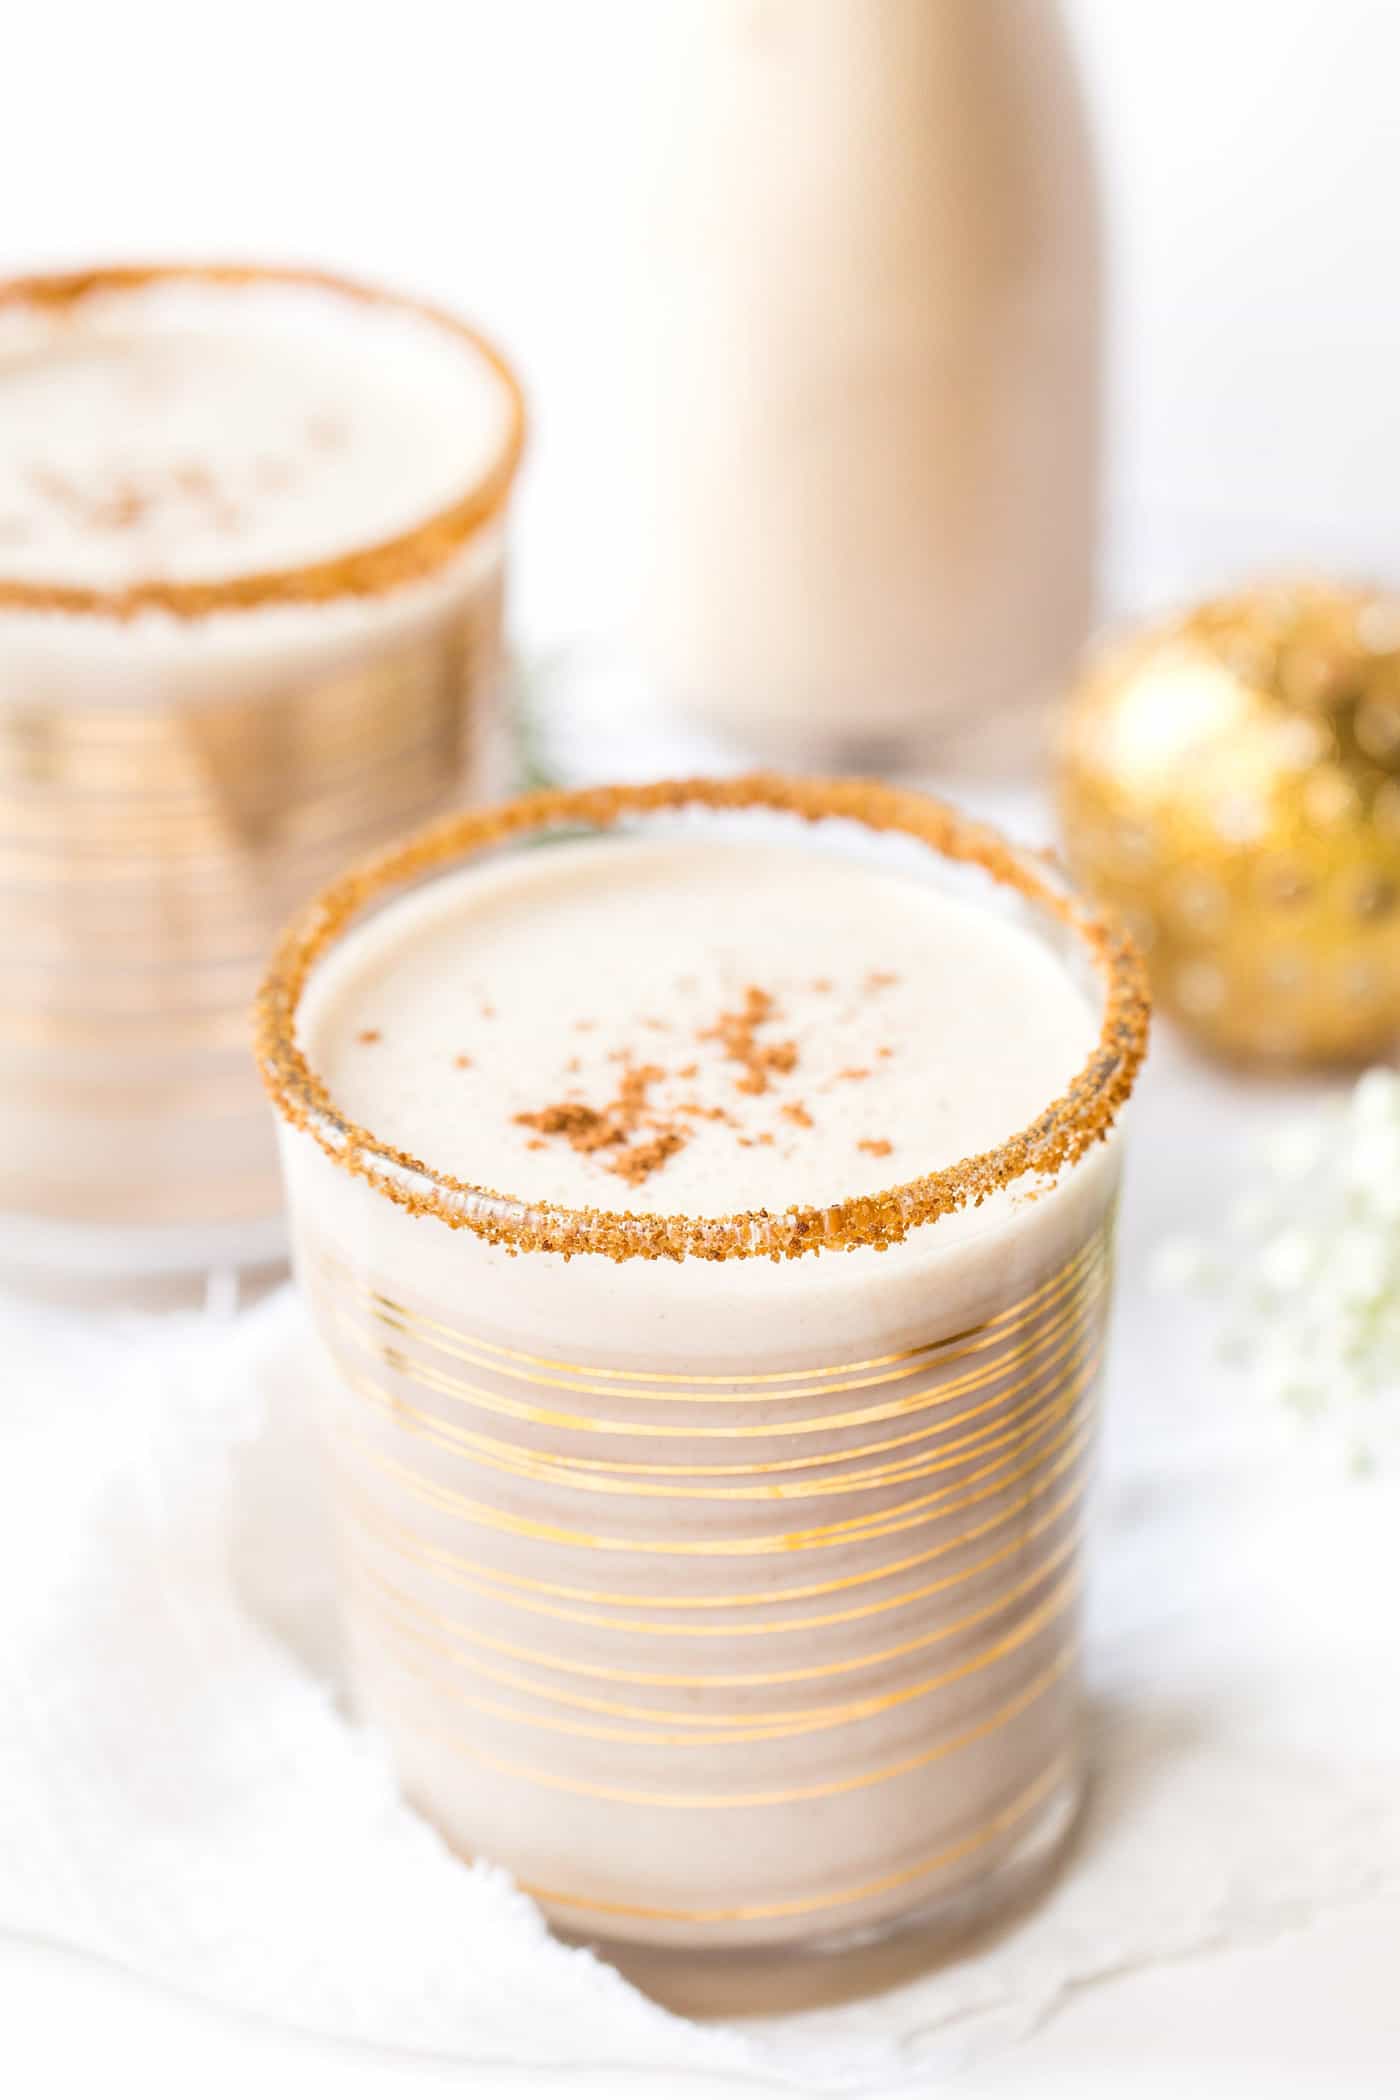 This AMAZING Vegan Eggnog is made with a blend of raw cashews and coconut milk to make it ultra creamy and totally delicious!